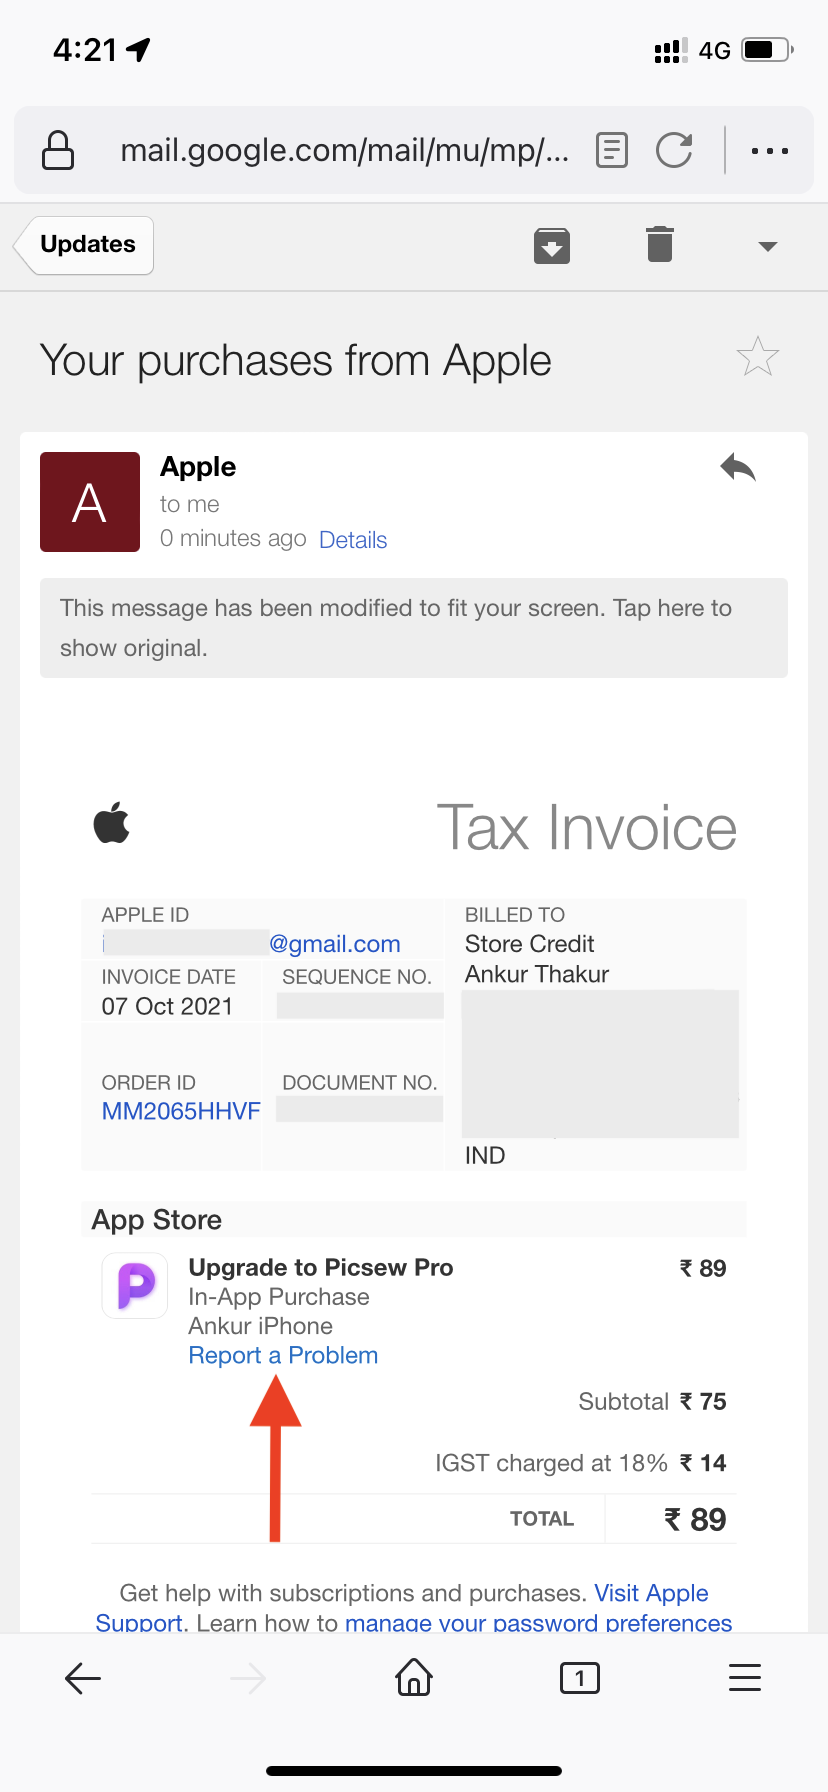 Report a Problem in the email Apple sent for as your bill. or invoice